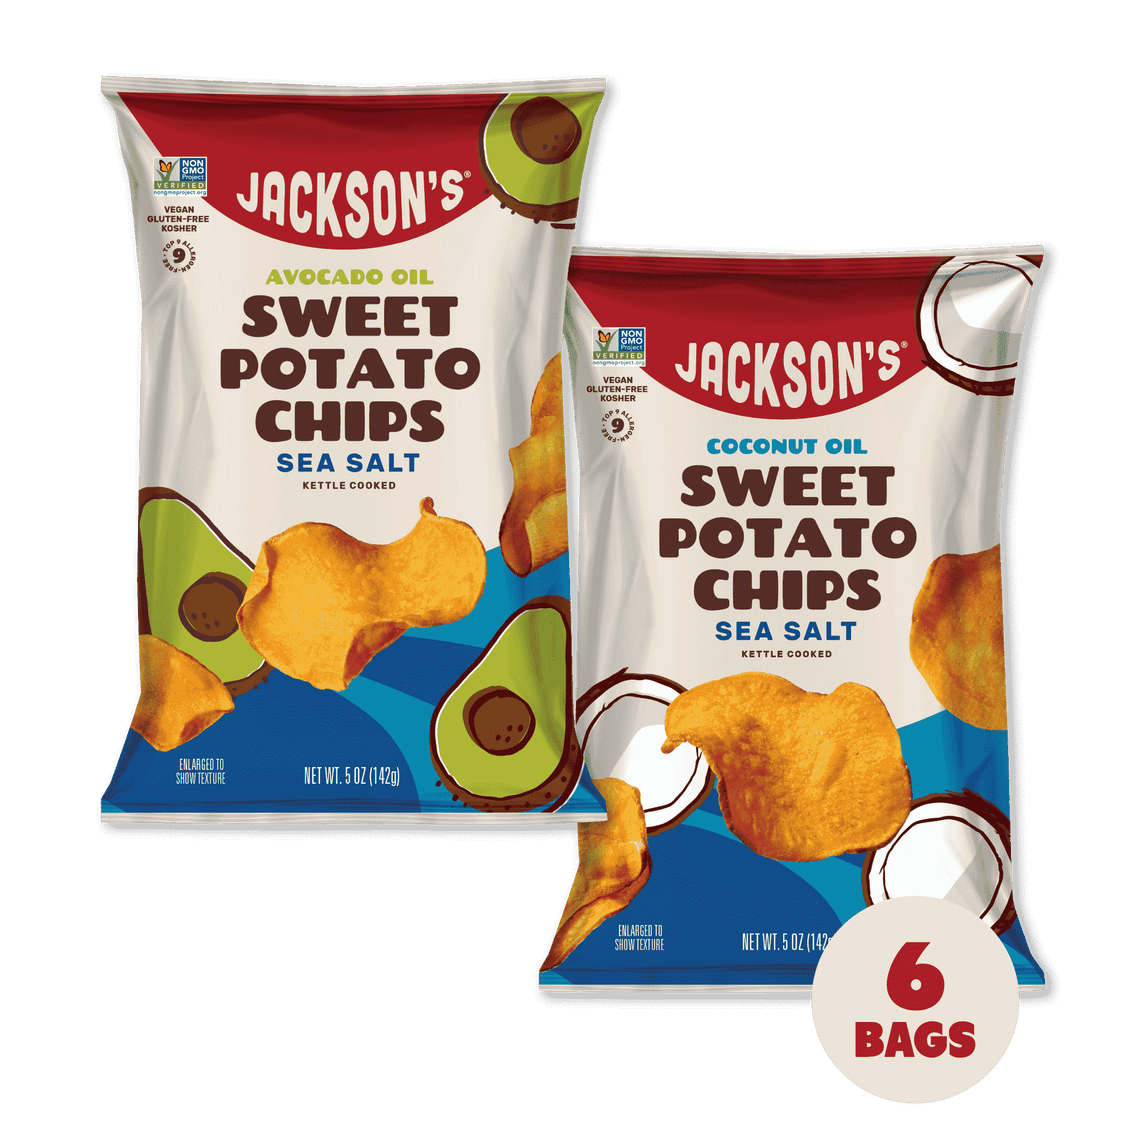 Jackson's Avocado Oil and Coconut Oil Sea Salt kettle-cooked chips